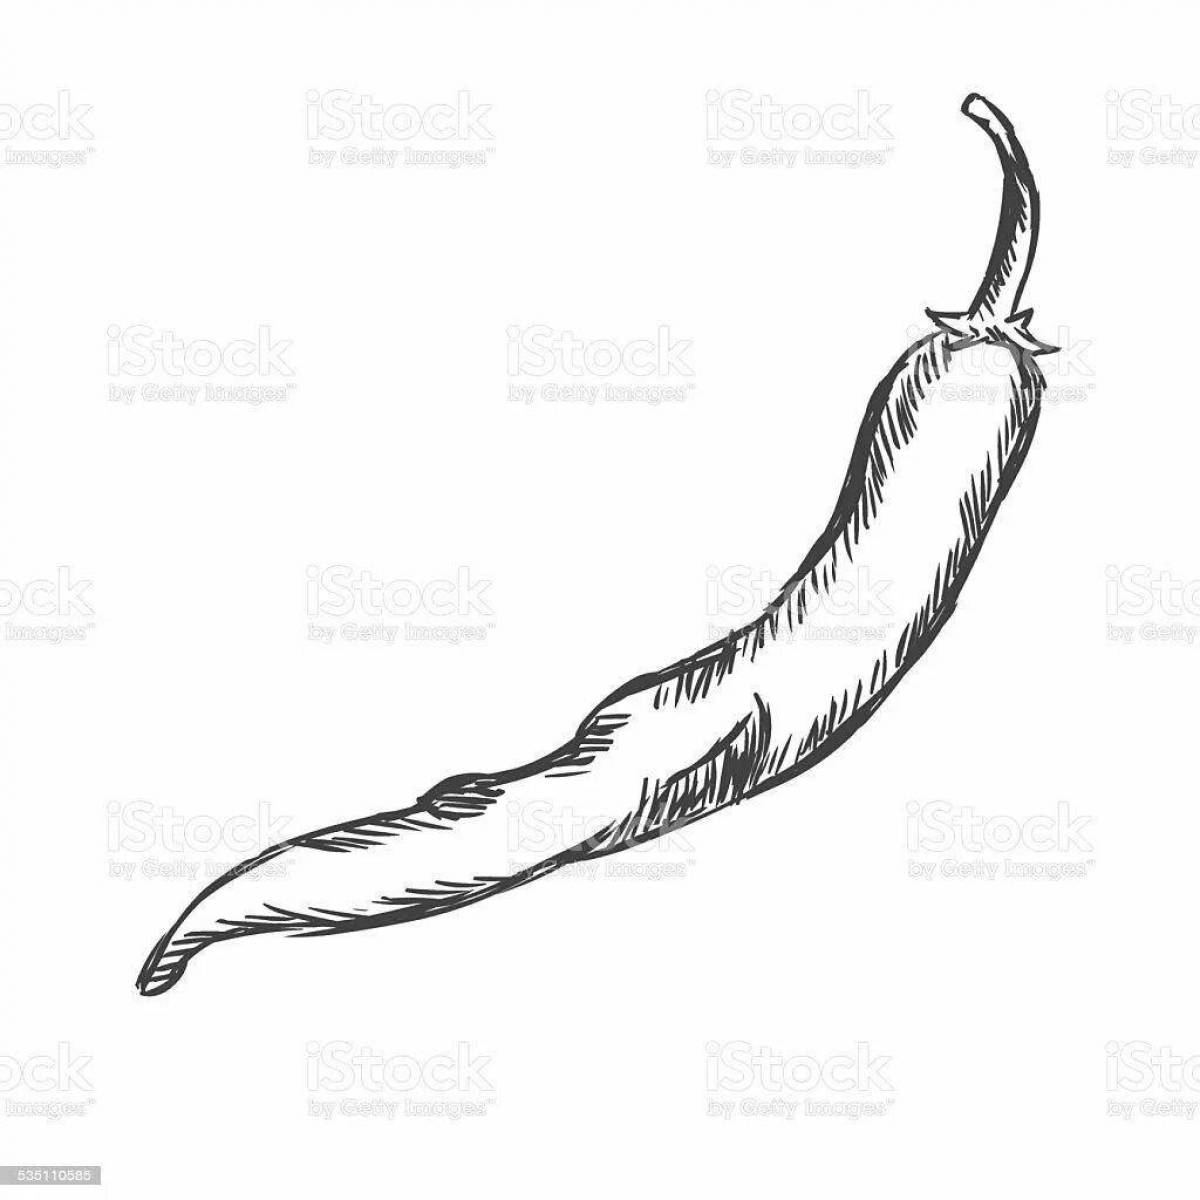 Exciting chili coloring page